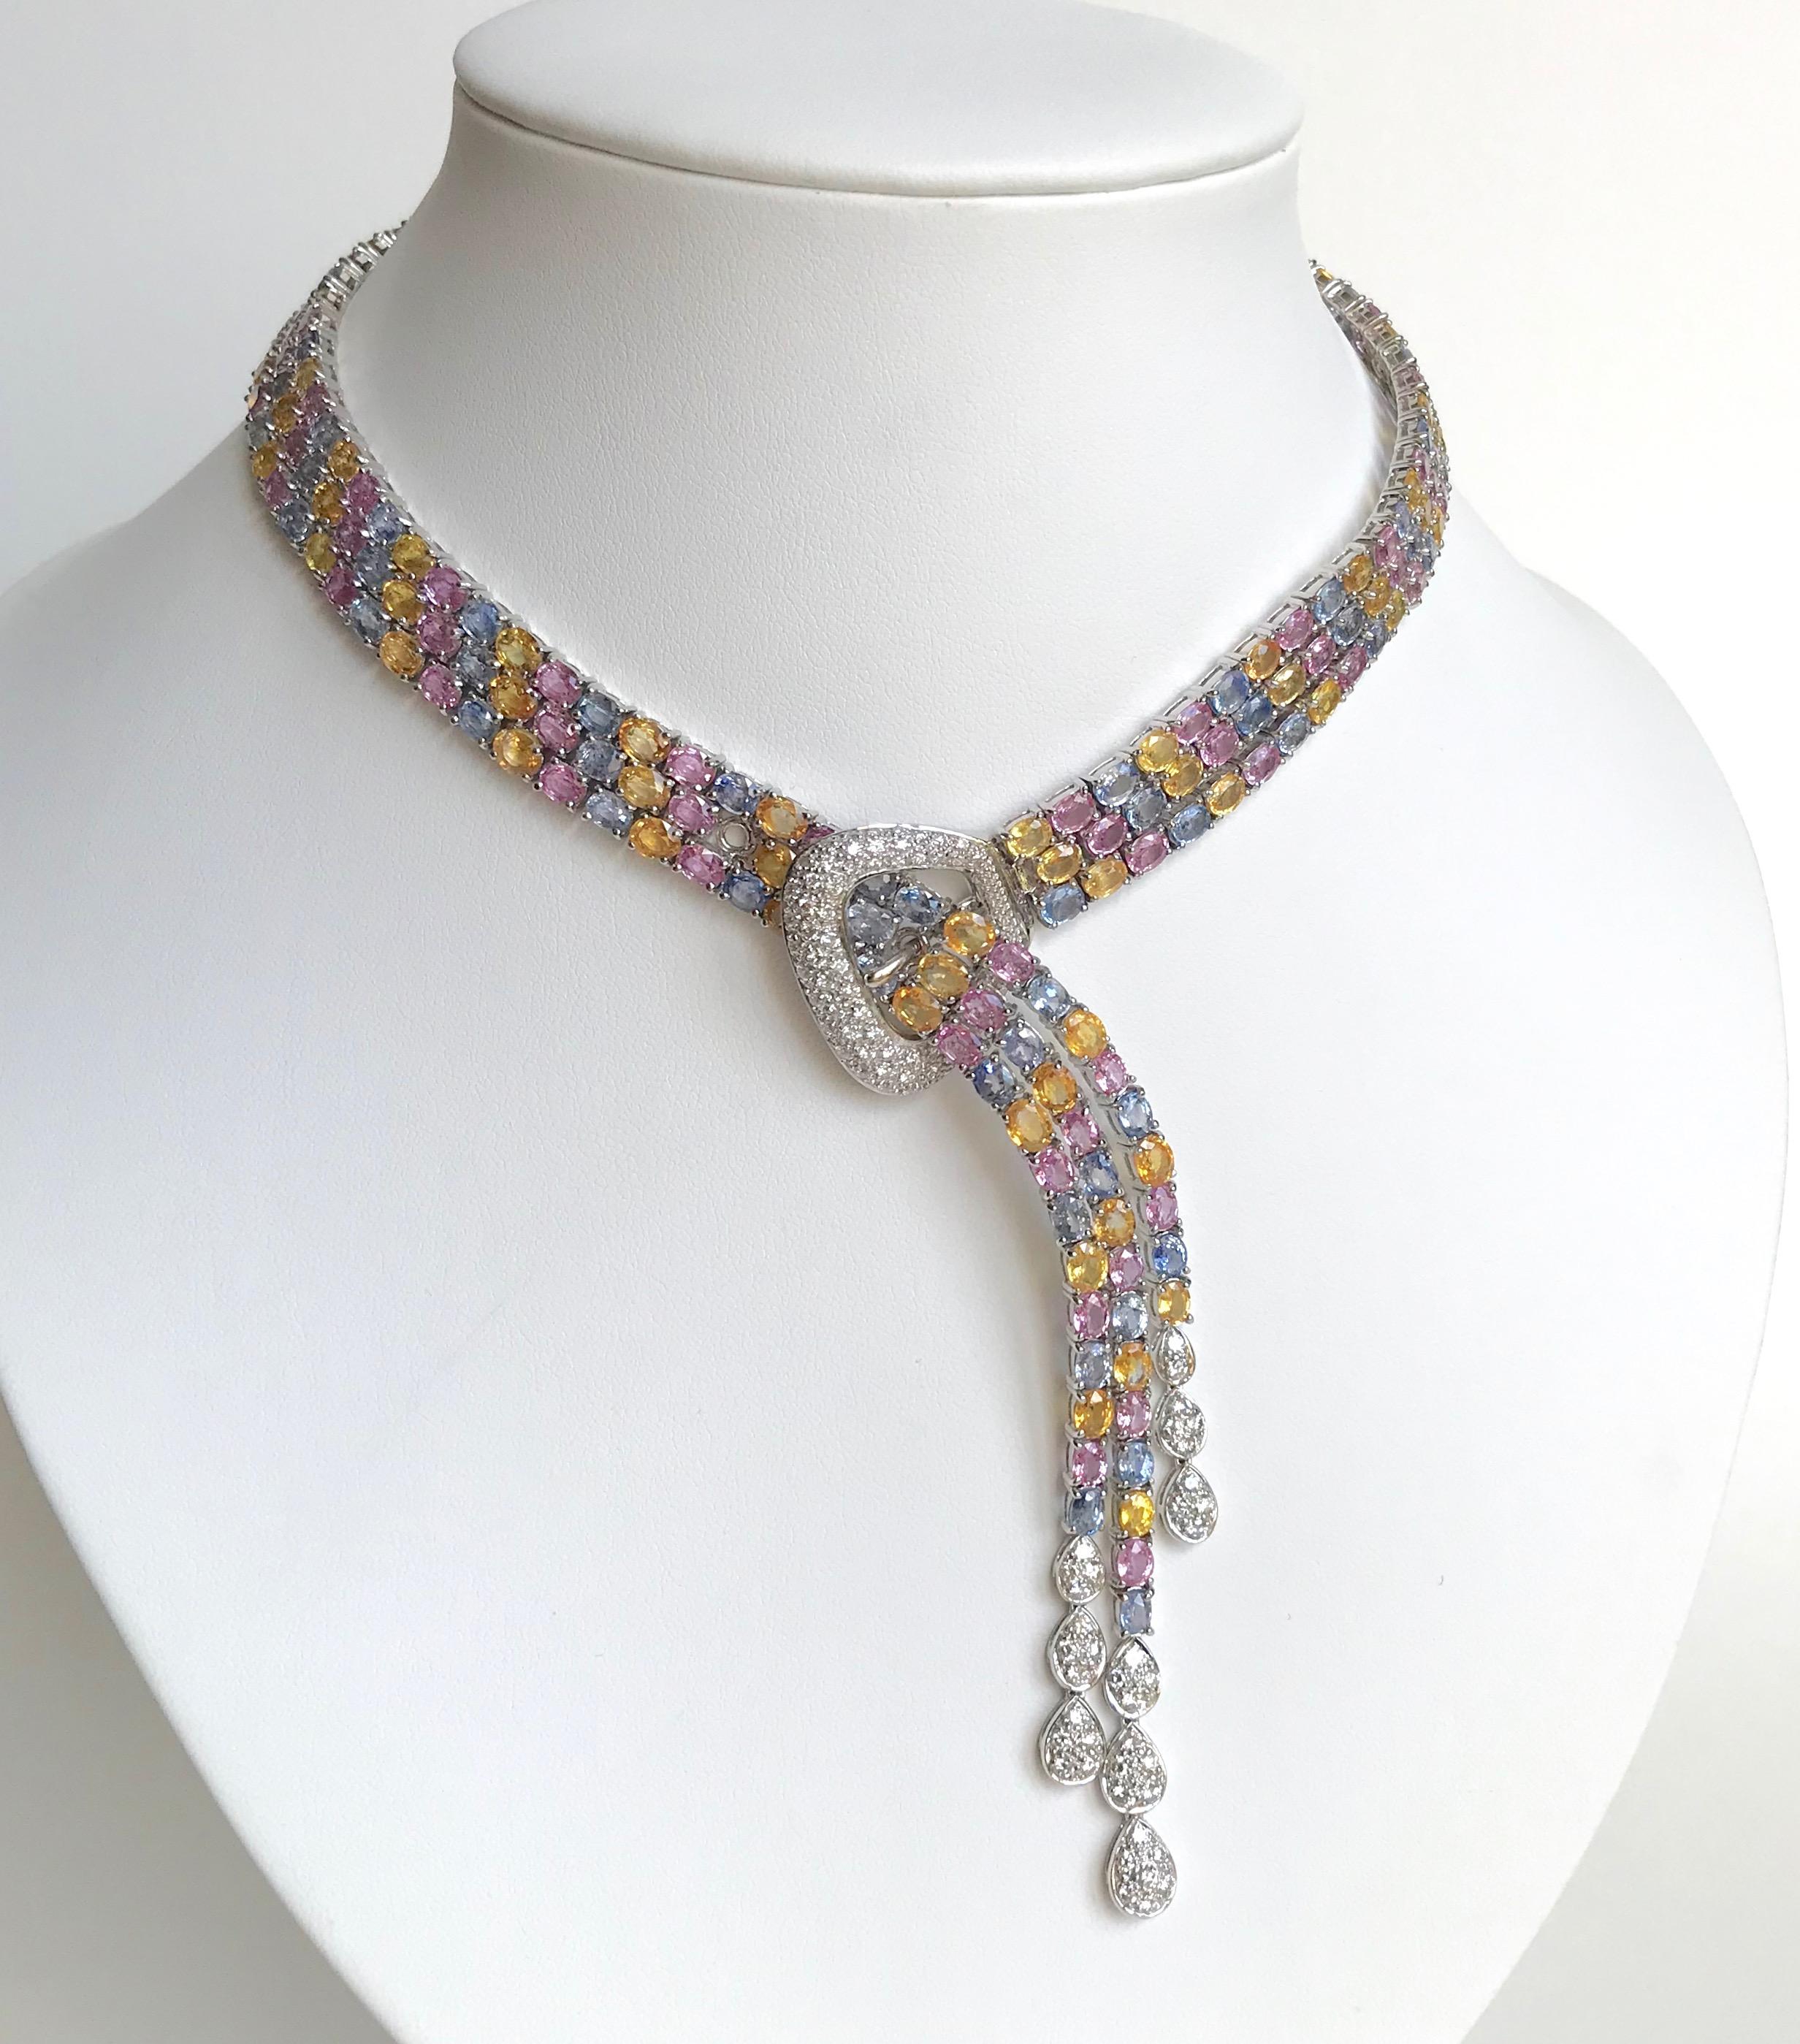 Necklace Flexible Belt in 18 carat White Gold setting 80 Carats of multicolored Pink, Yellow and Blue Sapphires in 3 Rows and 2.38 Carats of Diamonds. The End of the Belt separates into 3 Rows ending with 3 Droplets Drops set with Diamonds
The Belt